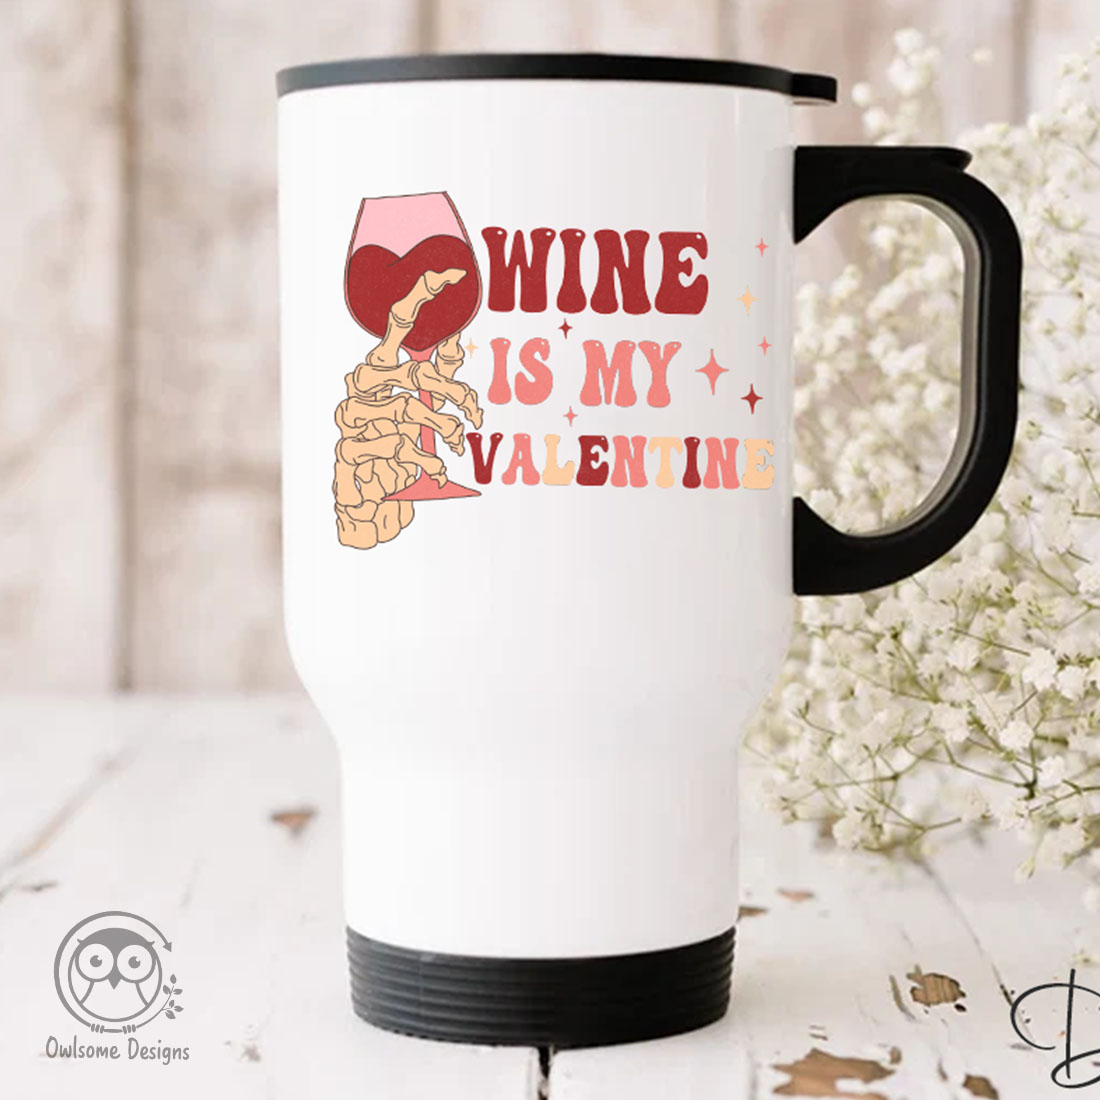 Image of mug with gorgeous print skeleton hands with glass of wine.